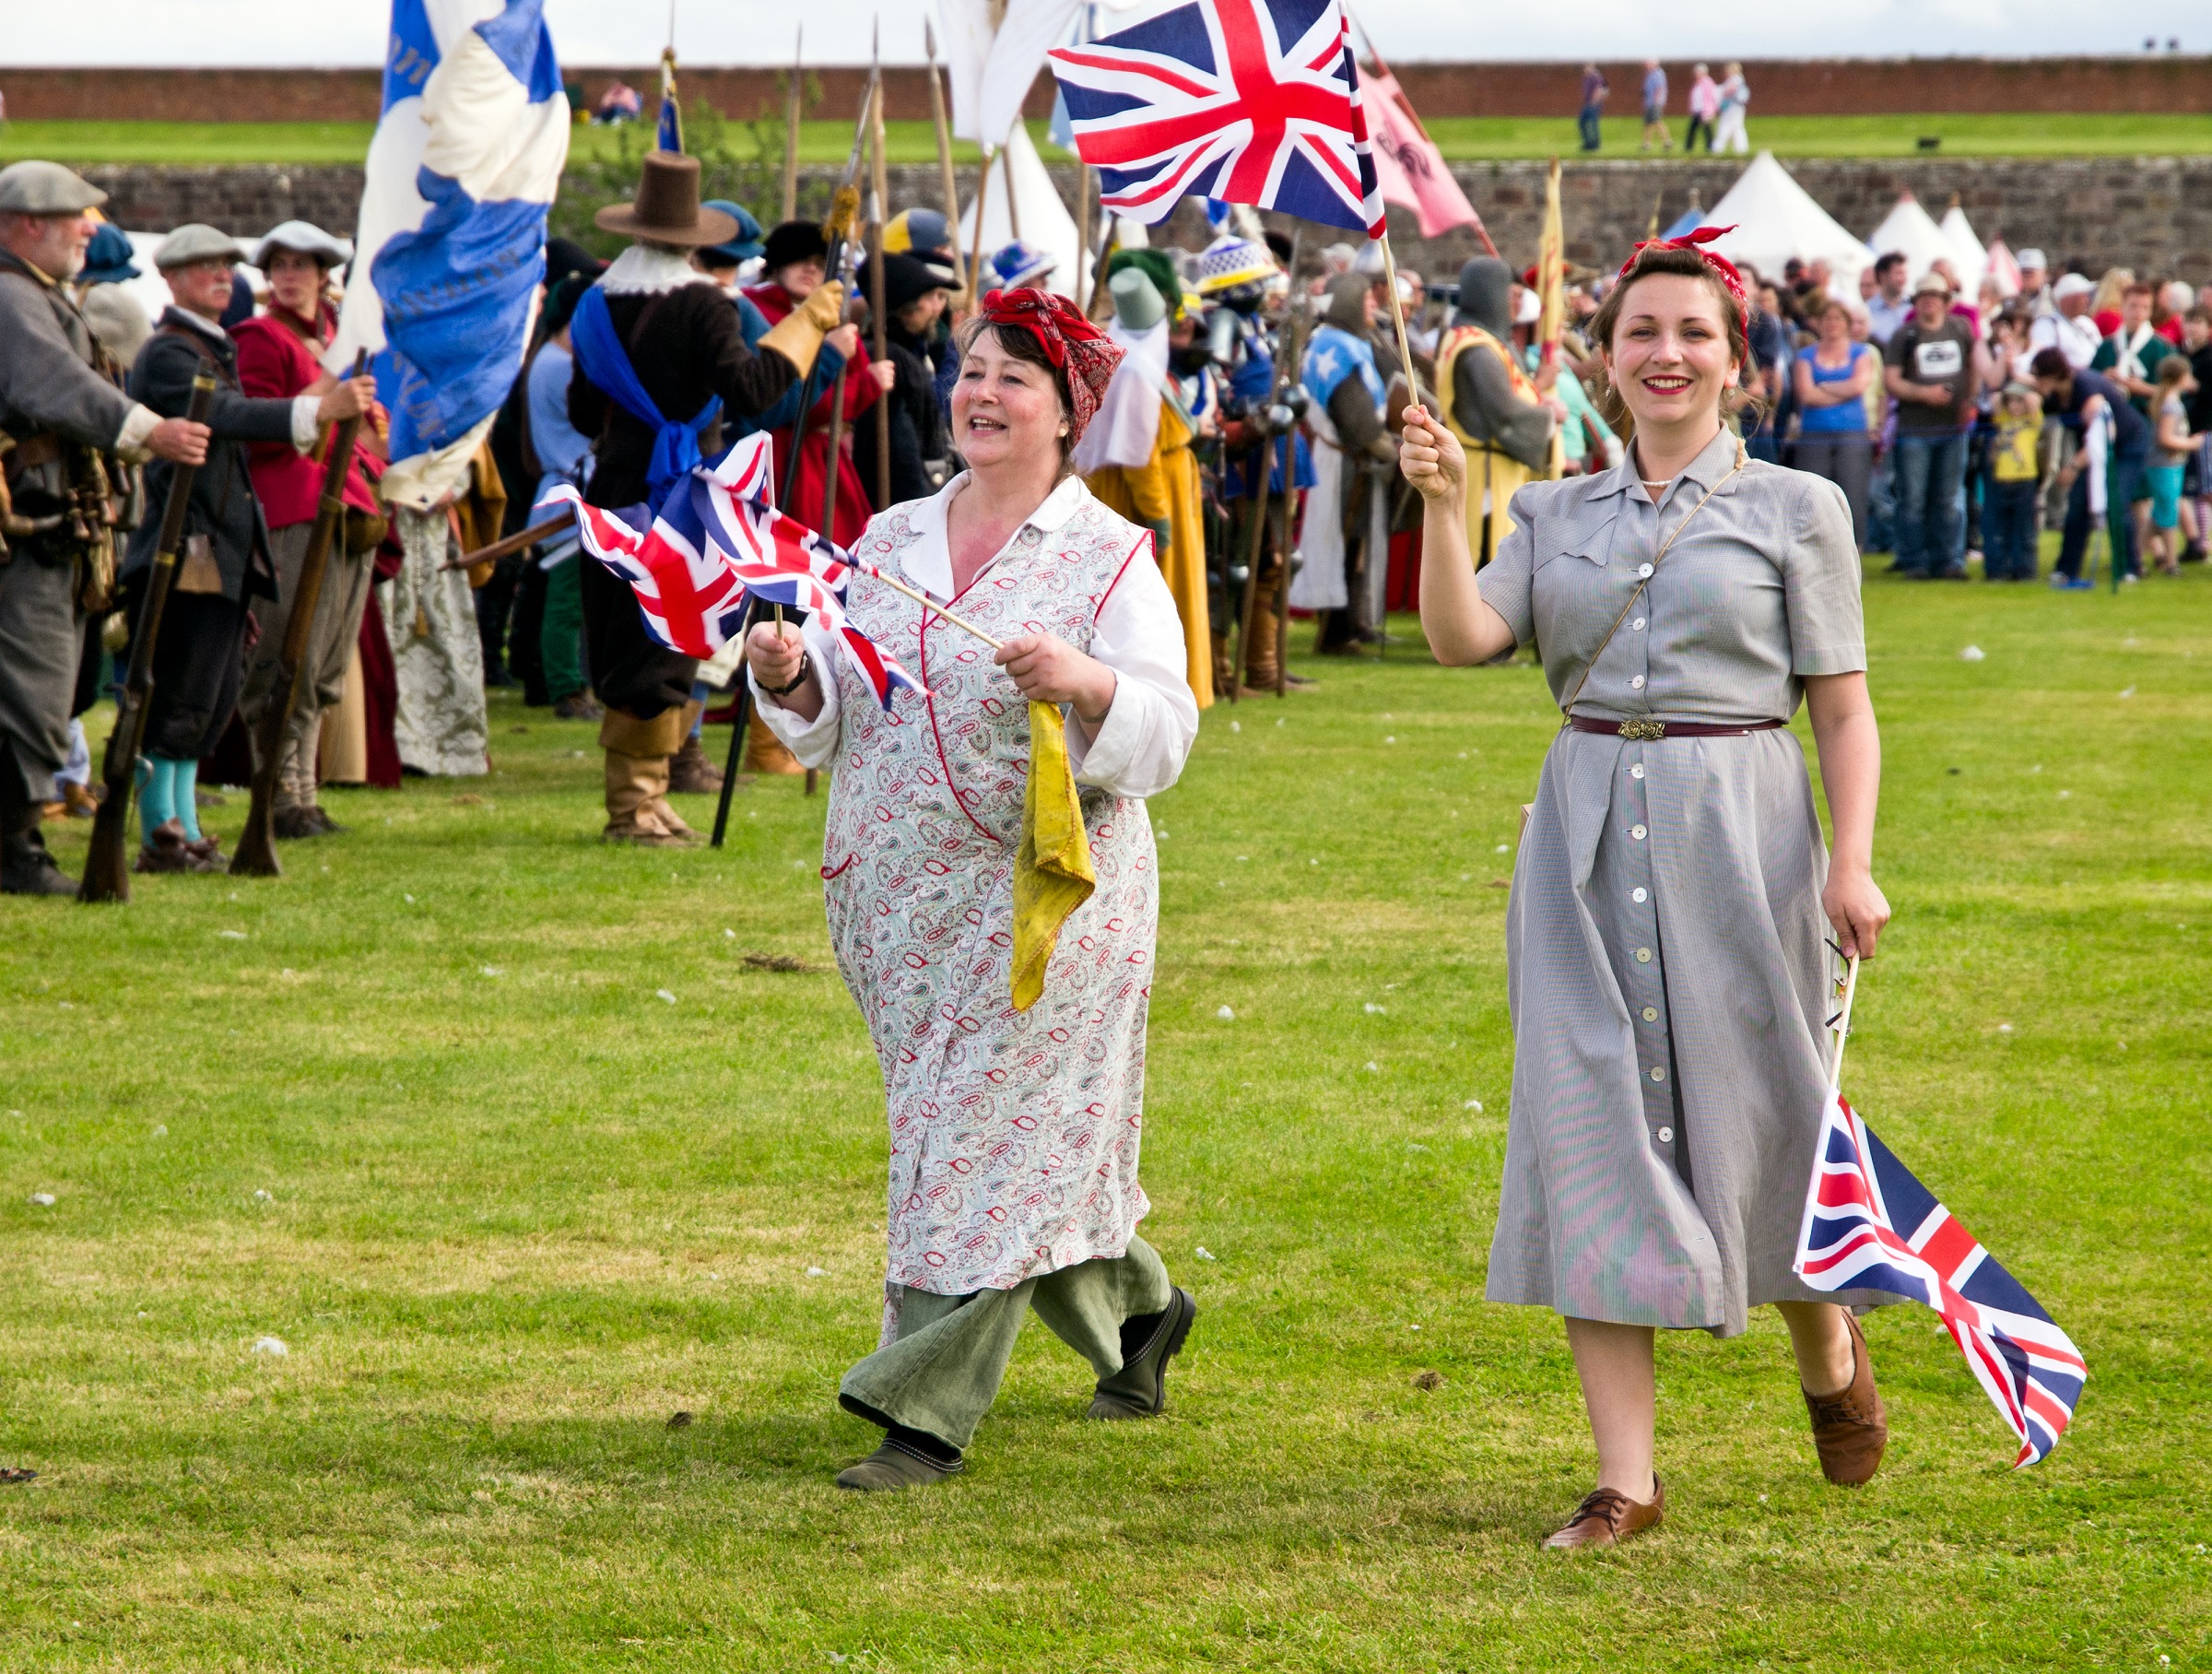 Two people dressed in re-enactment vintage, war-time clothes carrying Union Jacks for Celebration of the Centuries